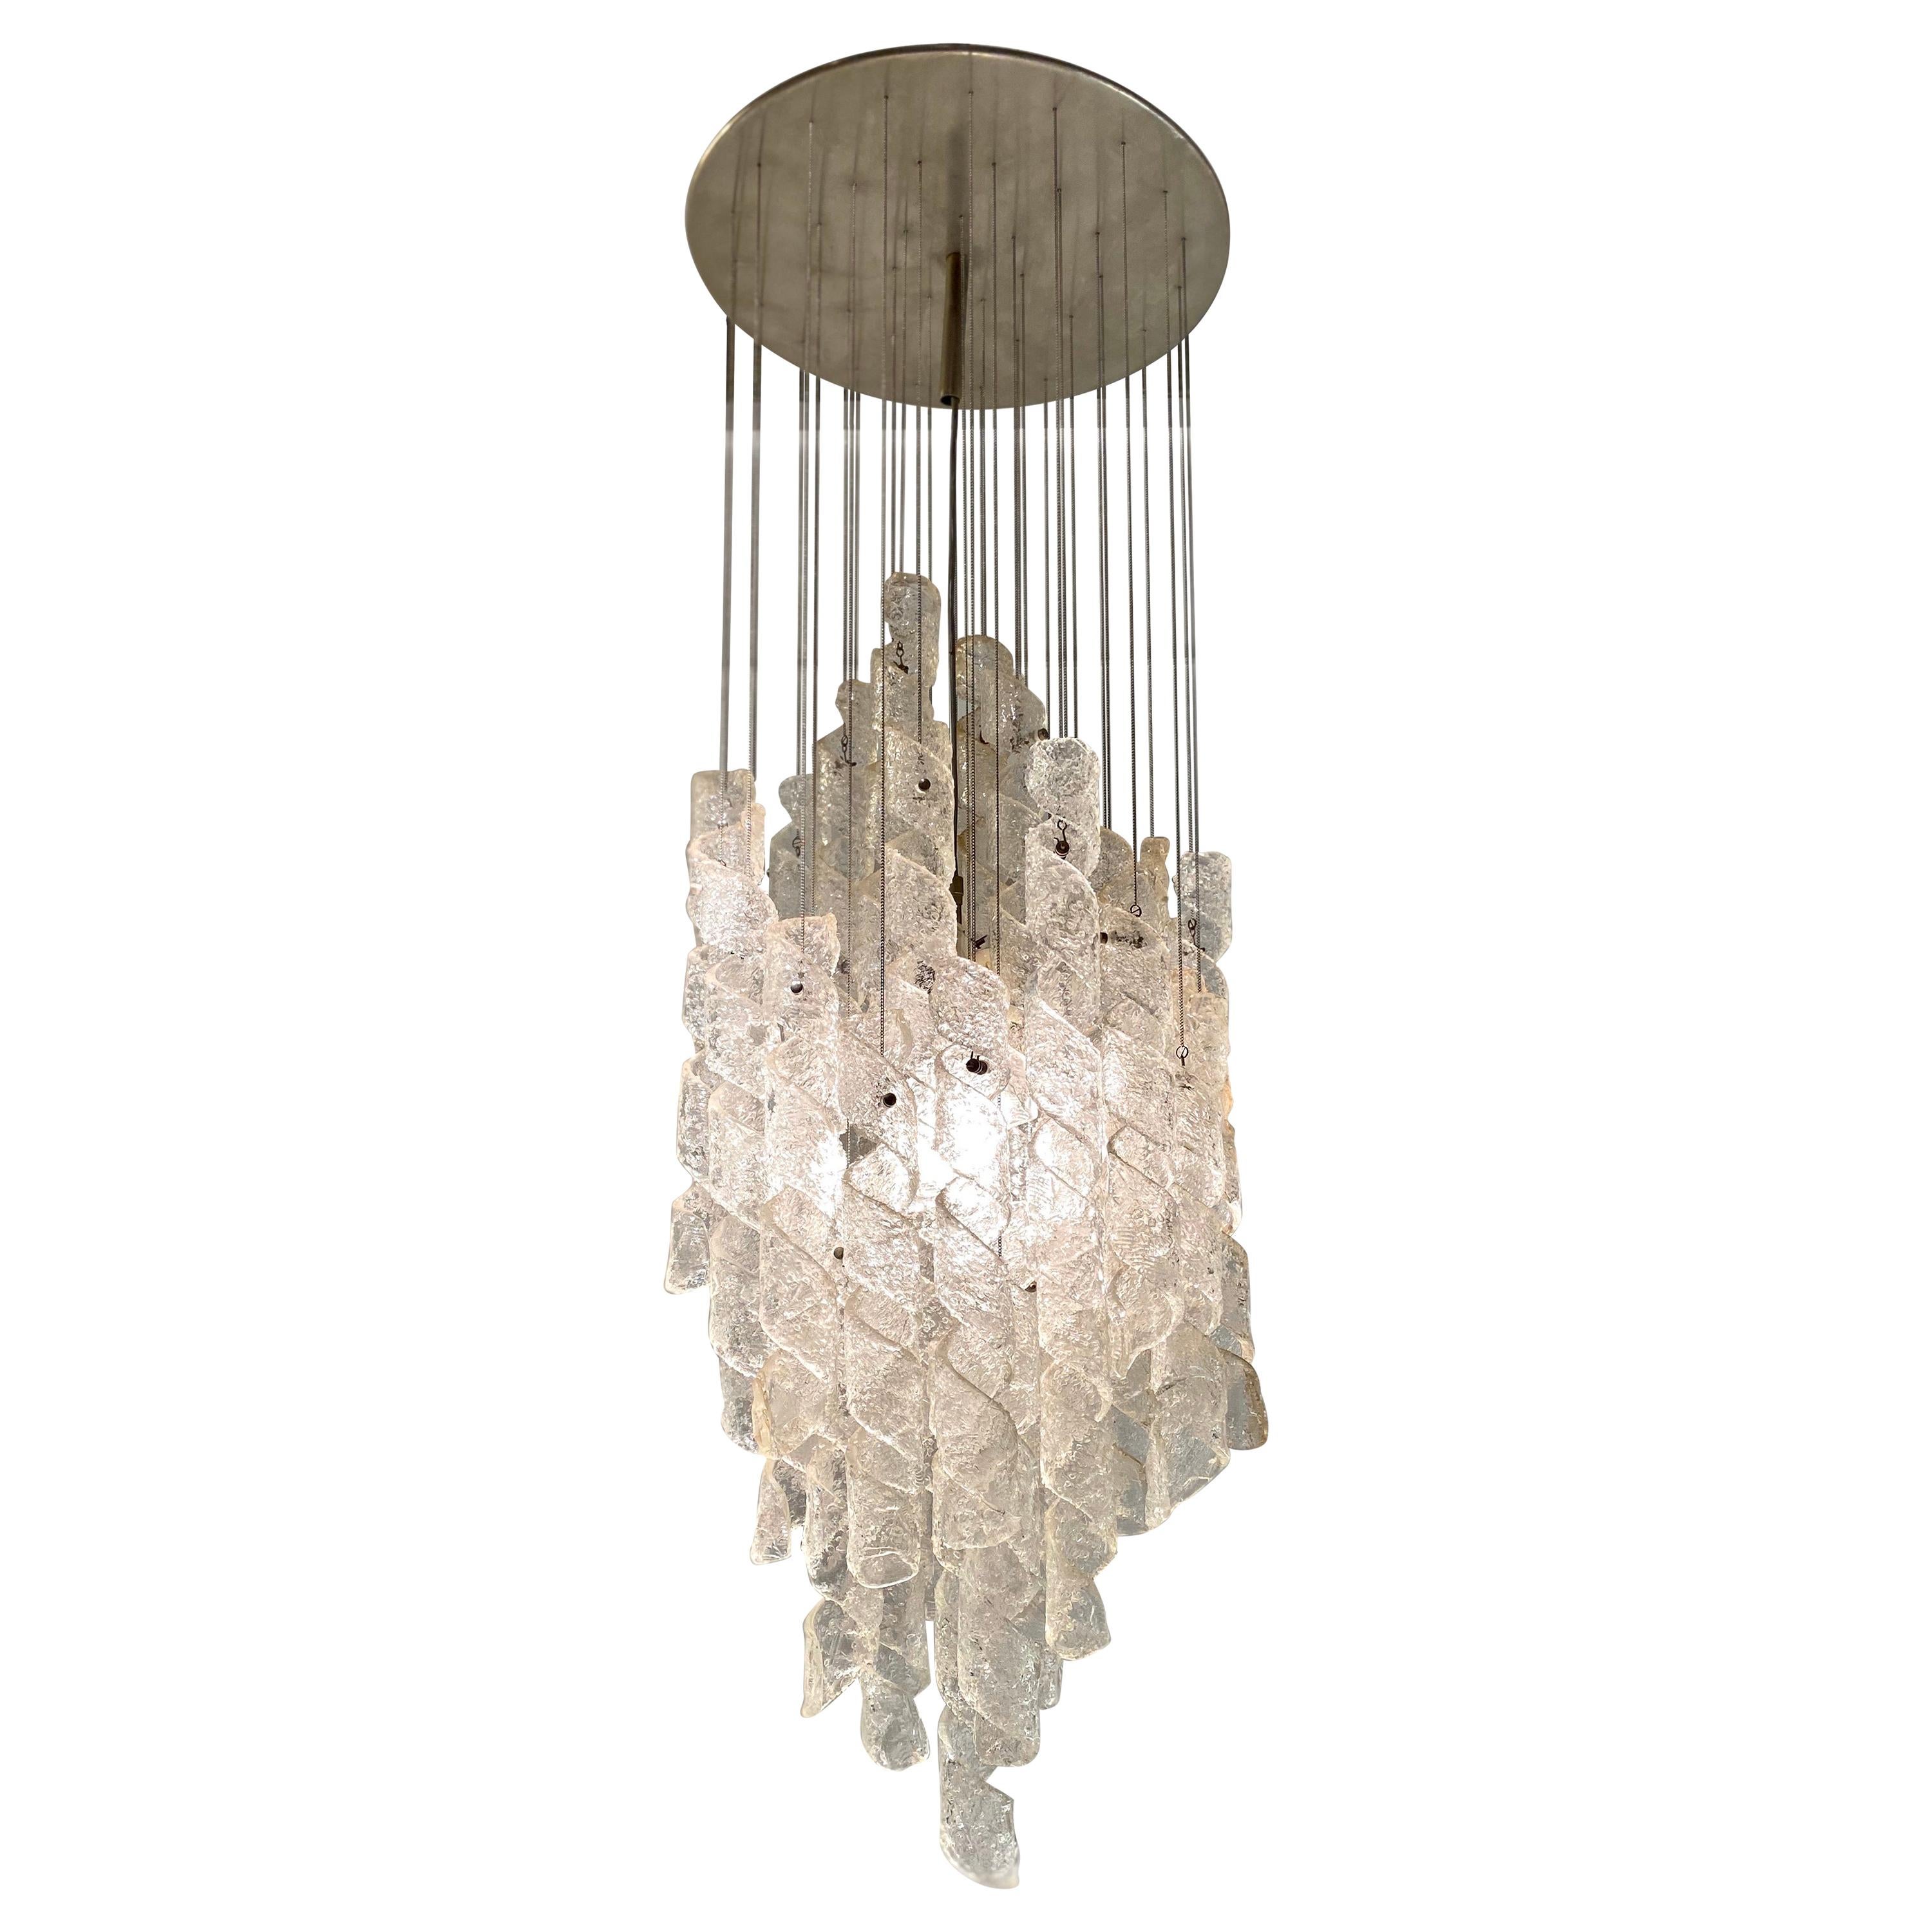 Mazzega Ceiling Chandelier "Torciglione", 1970s